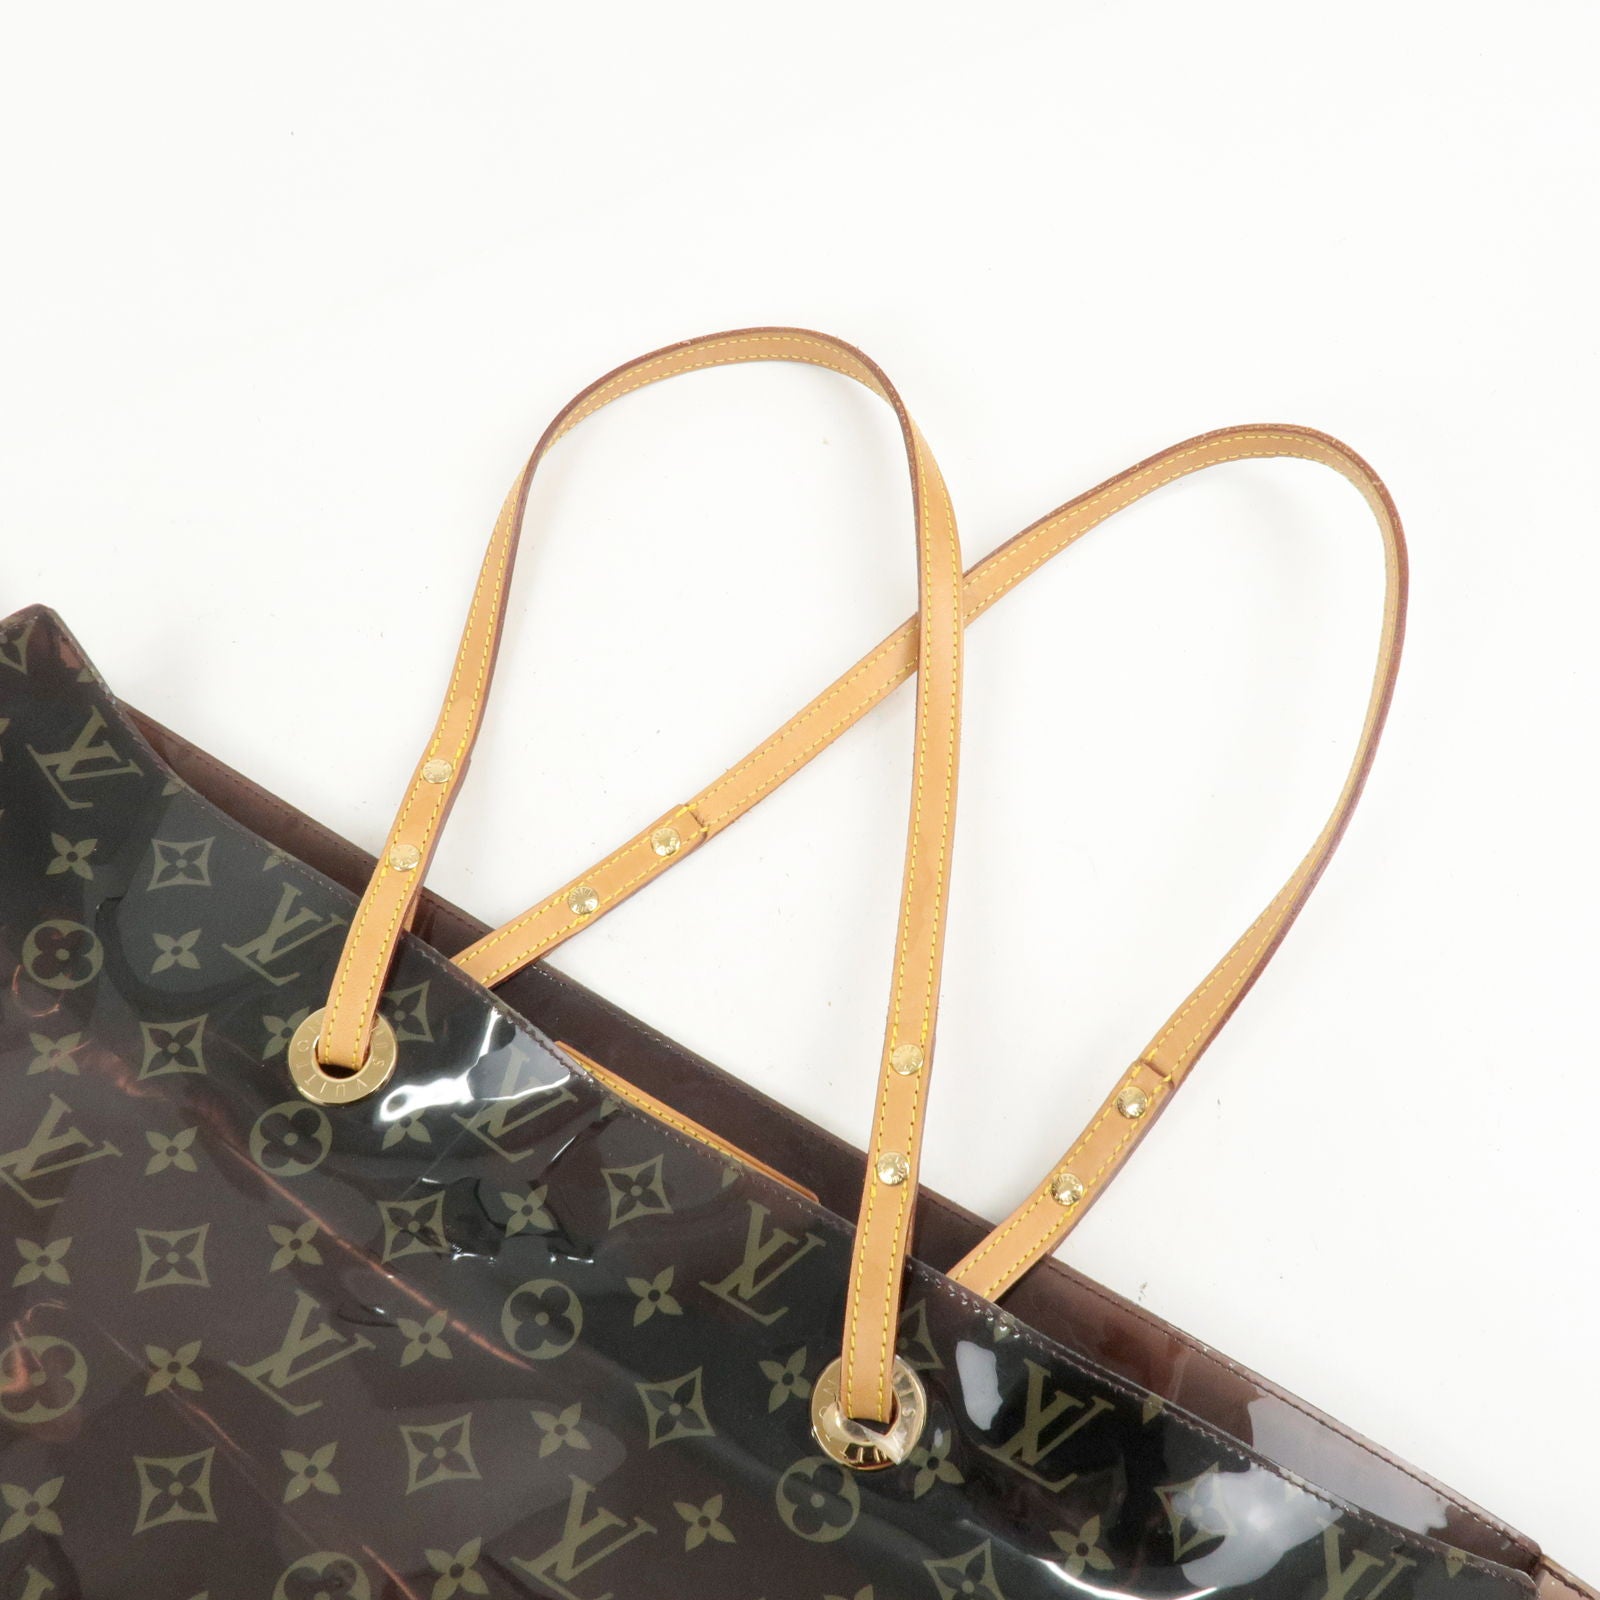 Vuitton - ep_vintage luxury Store - Tote - M50500 – dct - Cruise